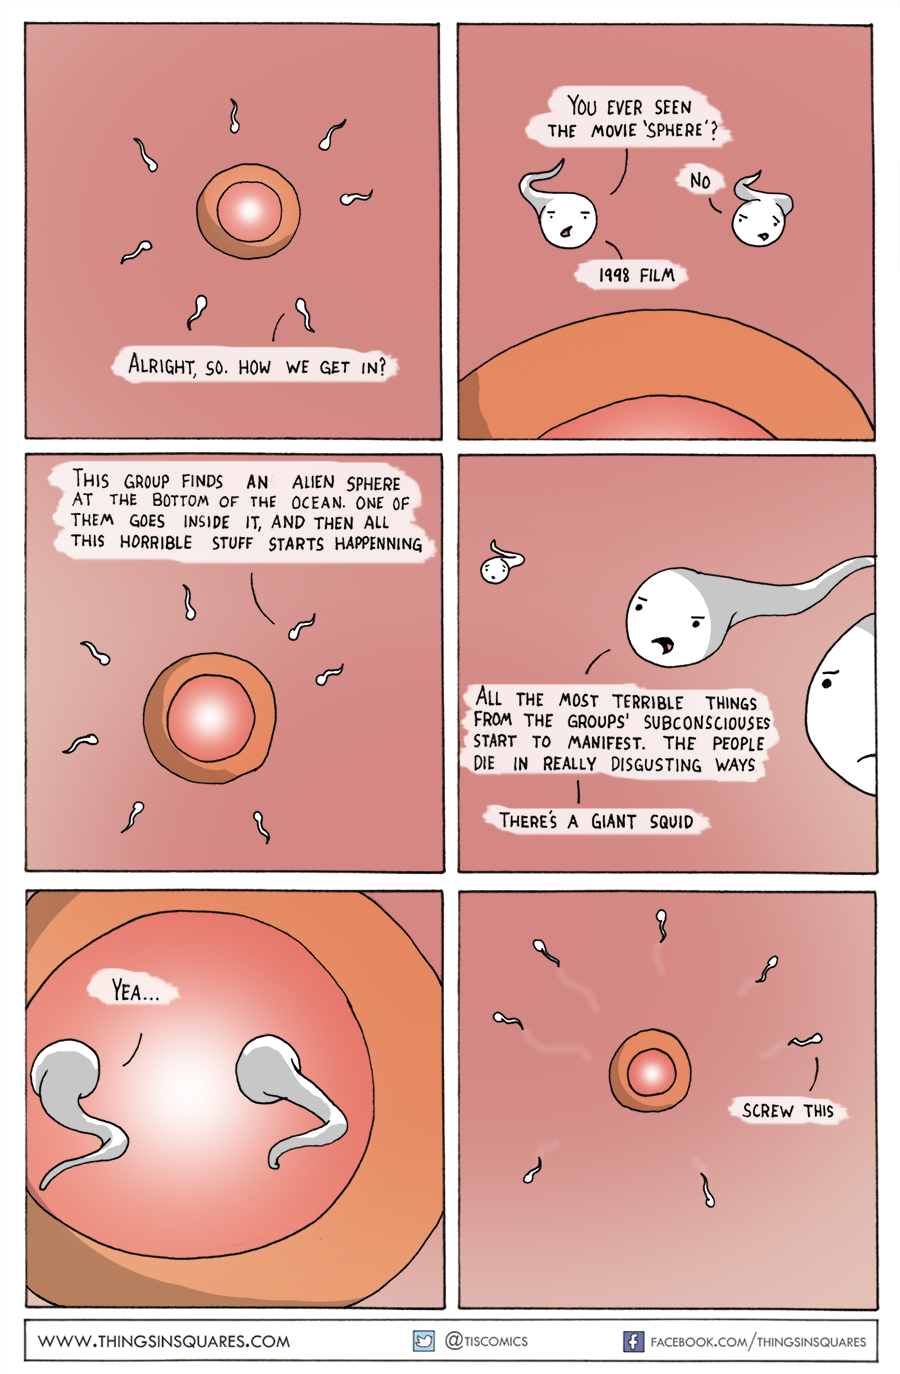 Sphere and sperm comic. Who will get in first?